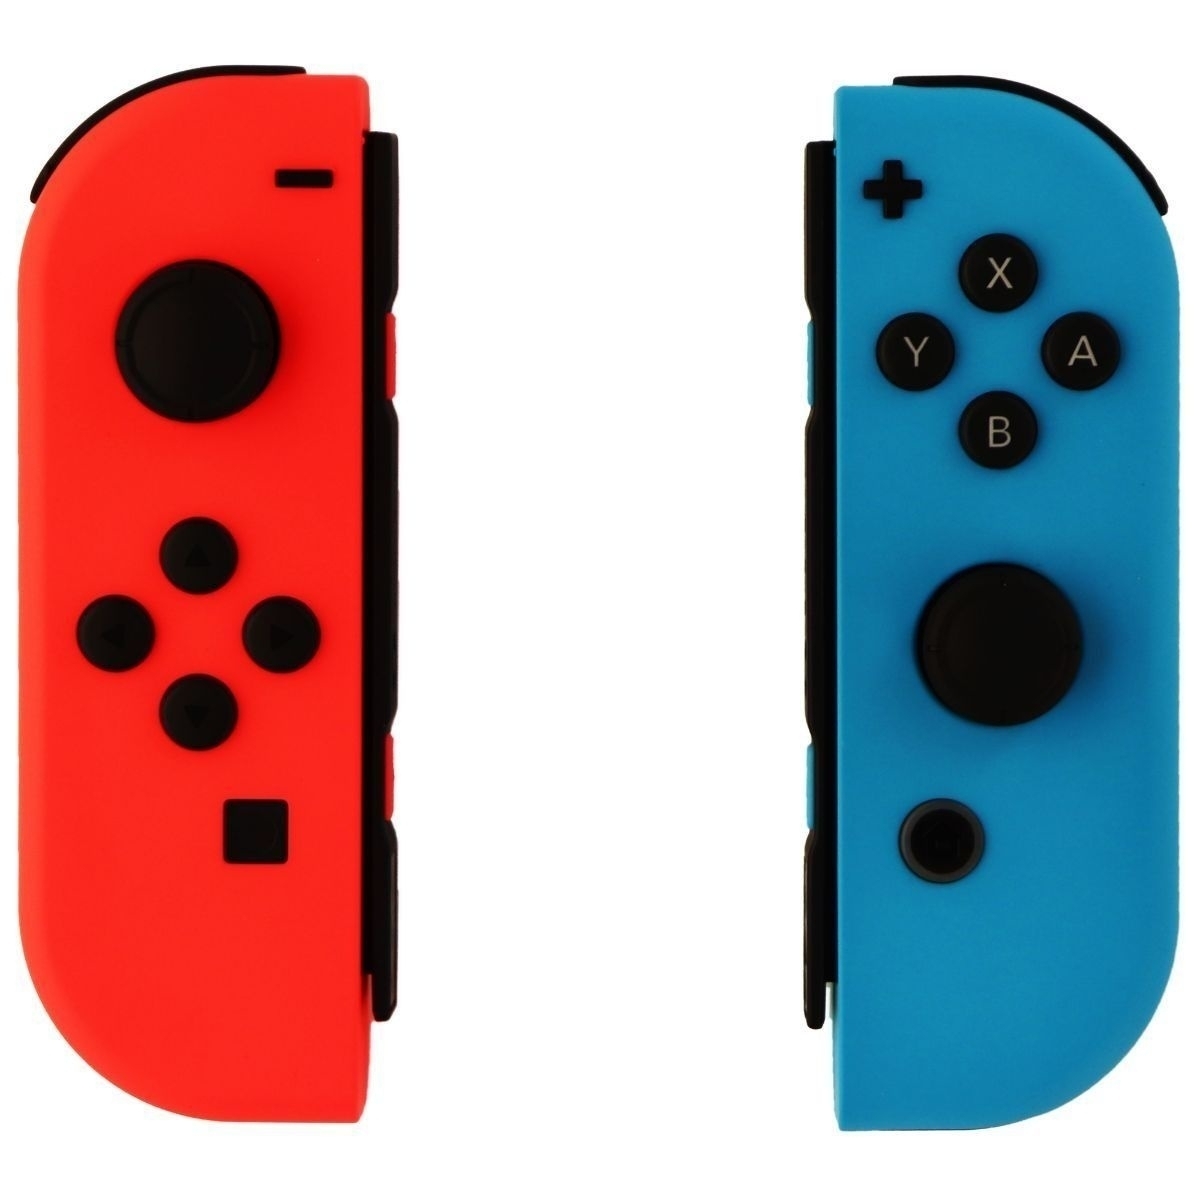 Nintendo Switch - Joy-Con (L/R) - Left Neon Red/ Right Neon Blue Controllers (Refurbished)